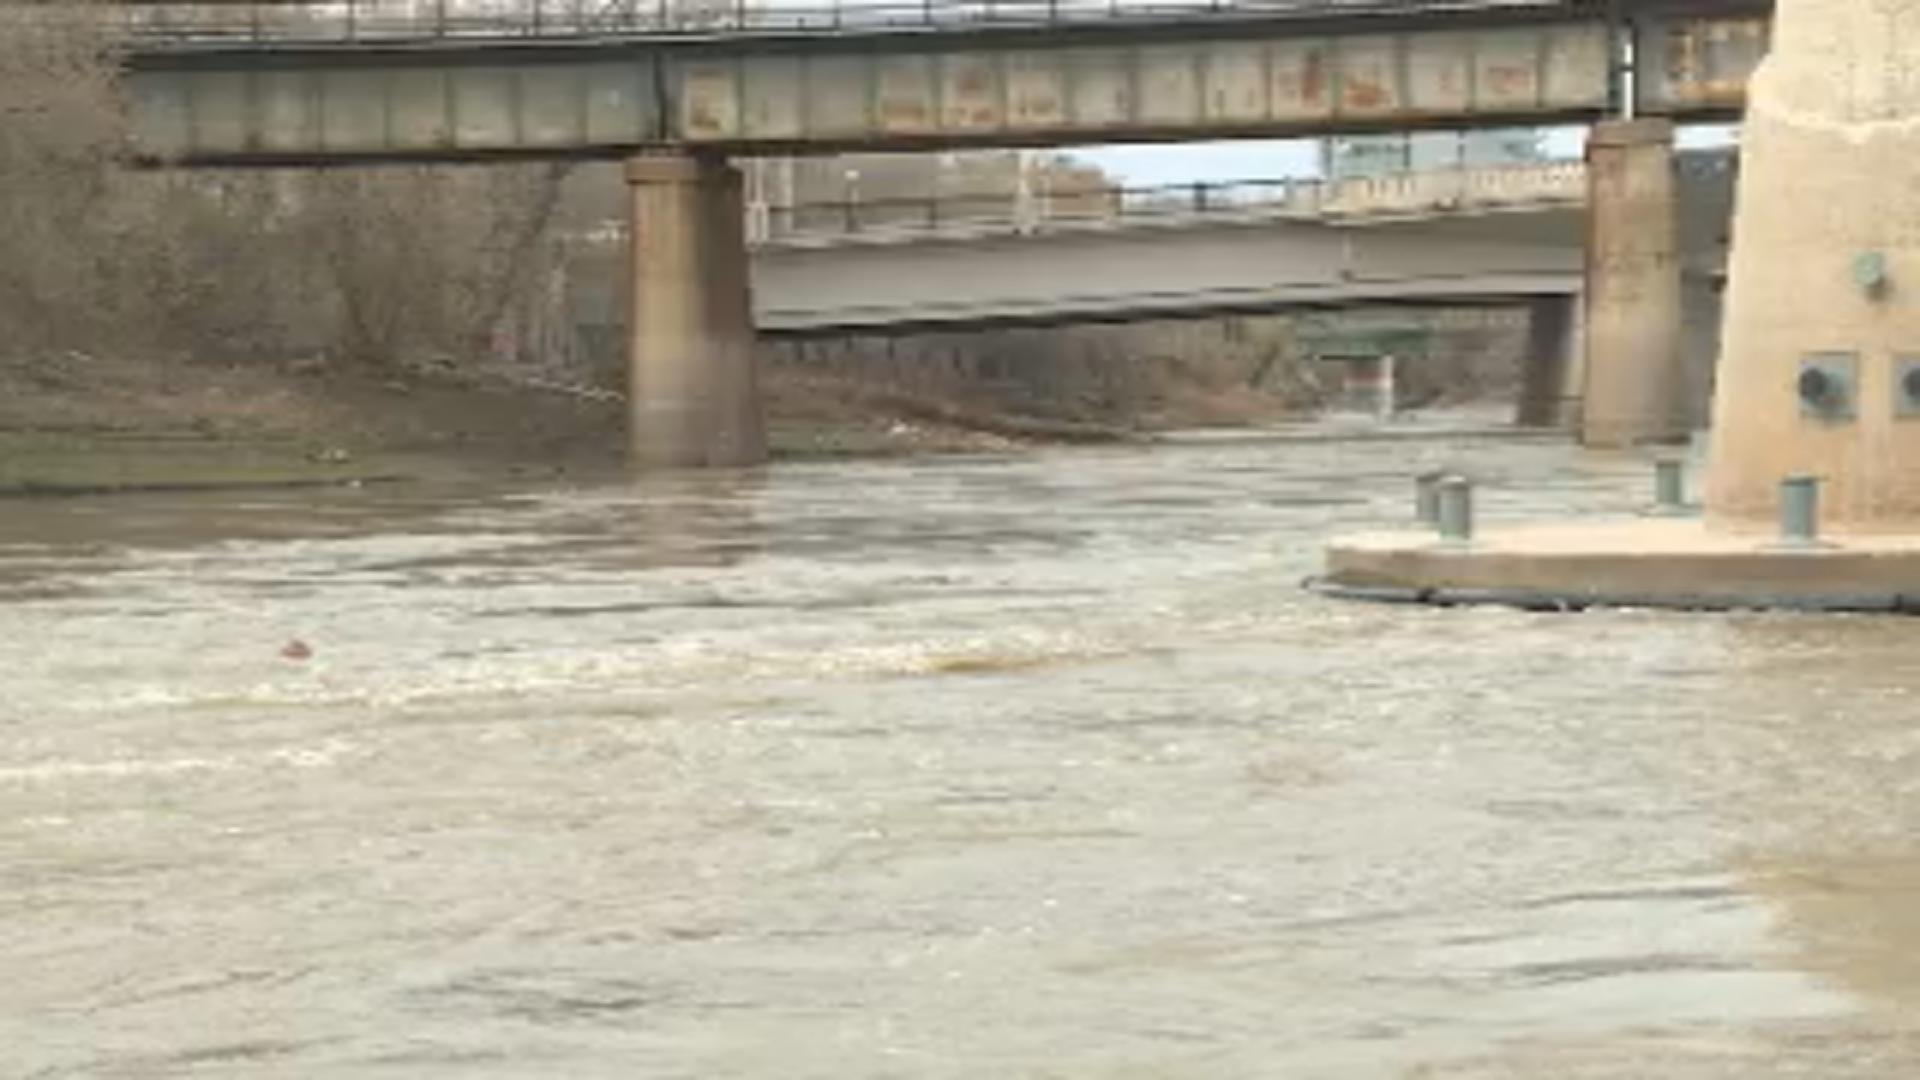 Winnipeg first responders make water rescue from fast-moving Assiniboine River